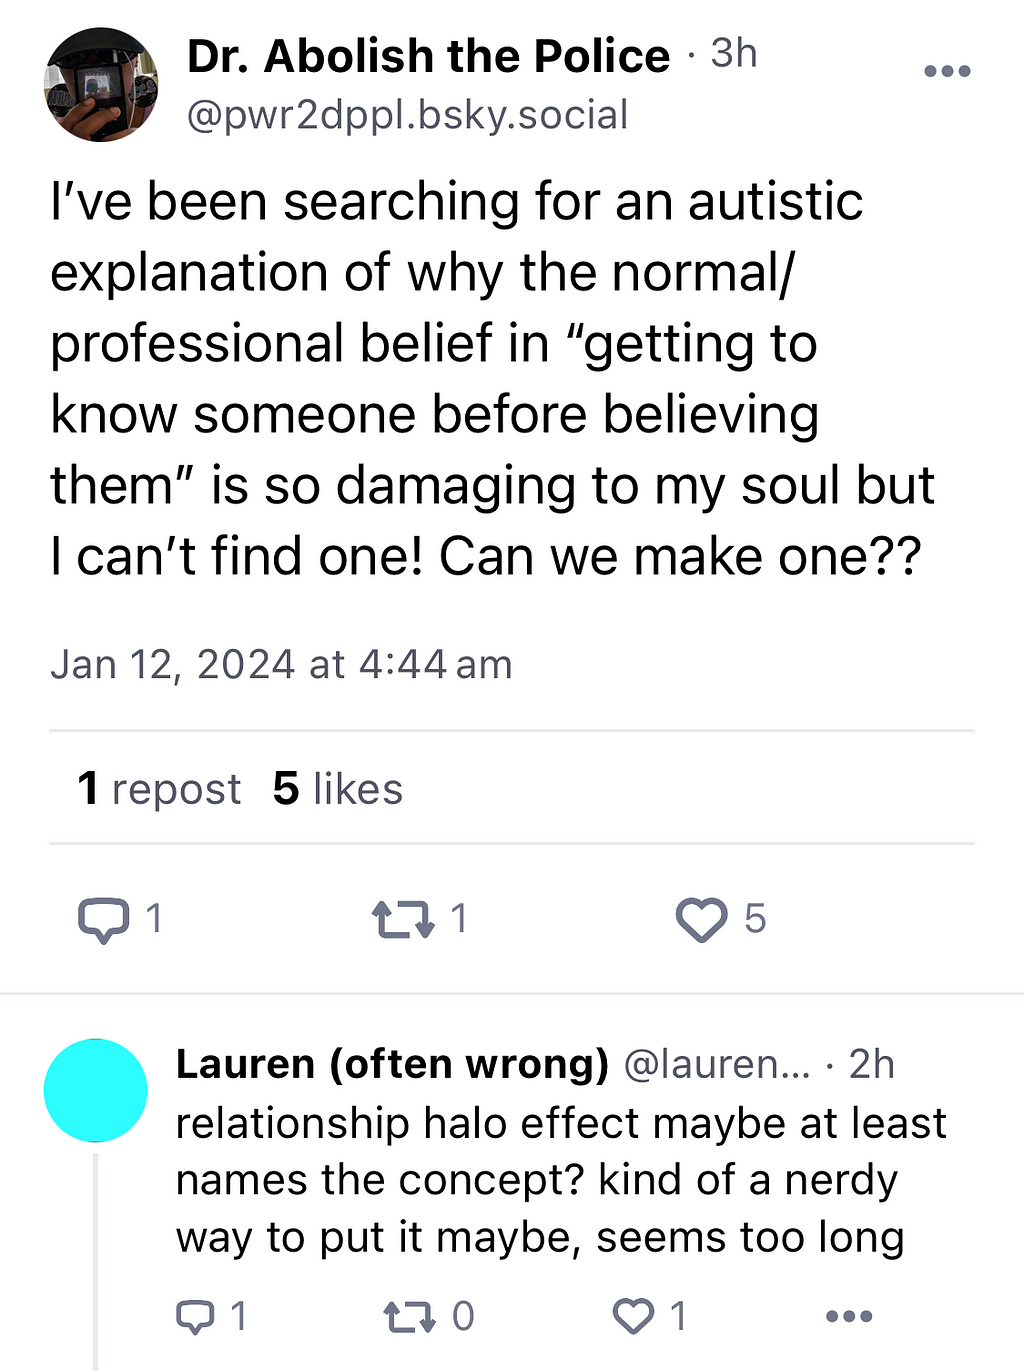 Someone asks on social media: I’ve been searching for an autistic explanation of why the normal/professional belief in “getting to know someone before believing them” is so damaging to my soul but I can’t find one. Can we make one? Another person replies: Relationship halo effect maybe at least names the concept? Kind of a nerdy way to put it maybe. Seems too long.